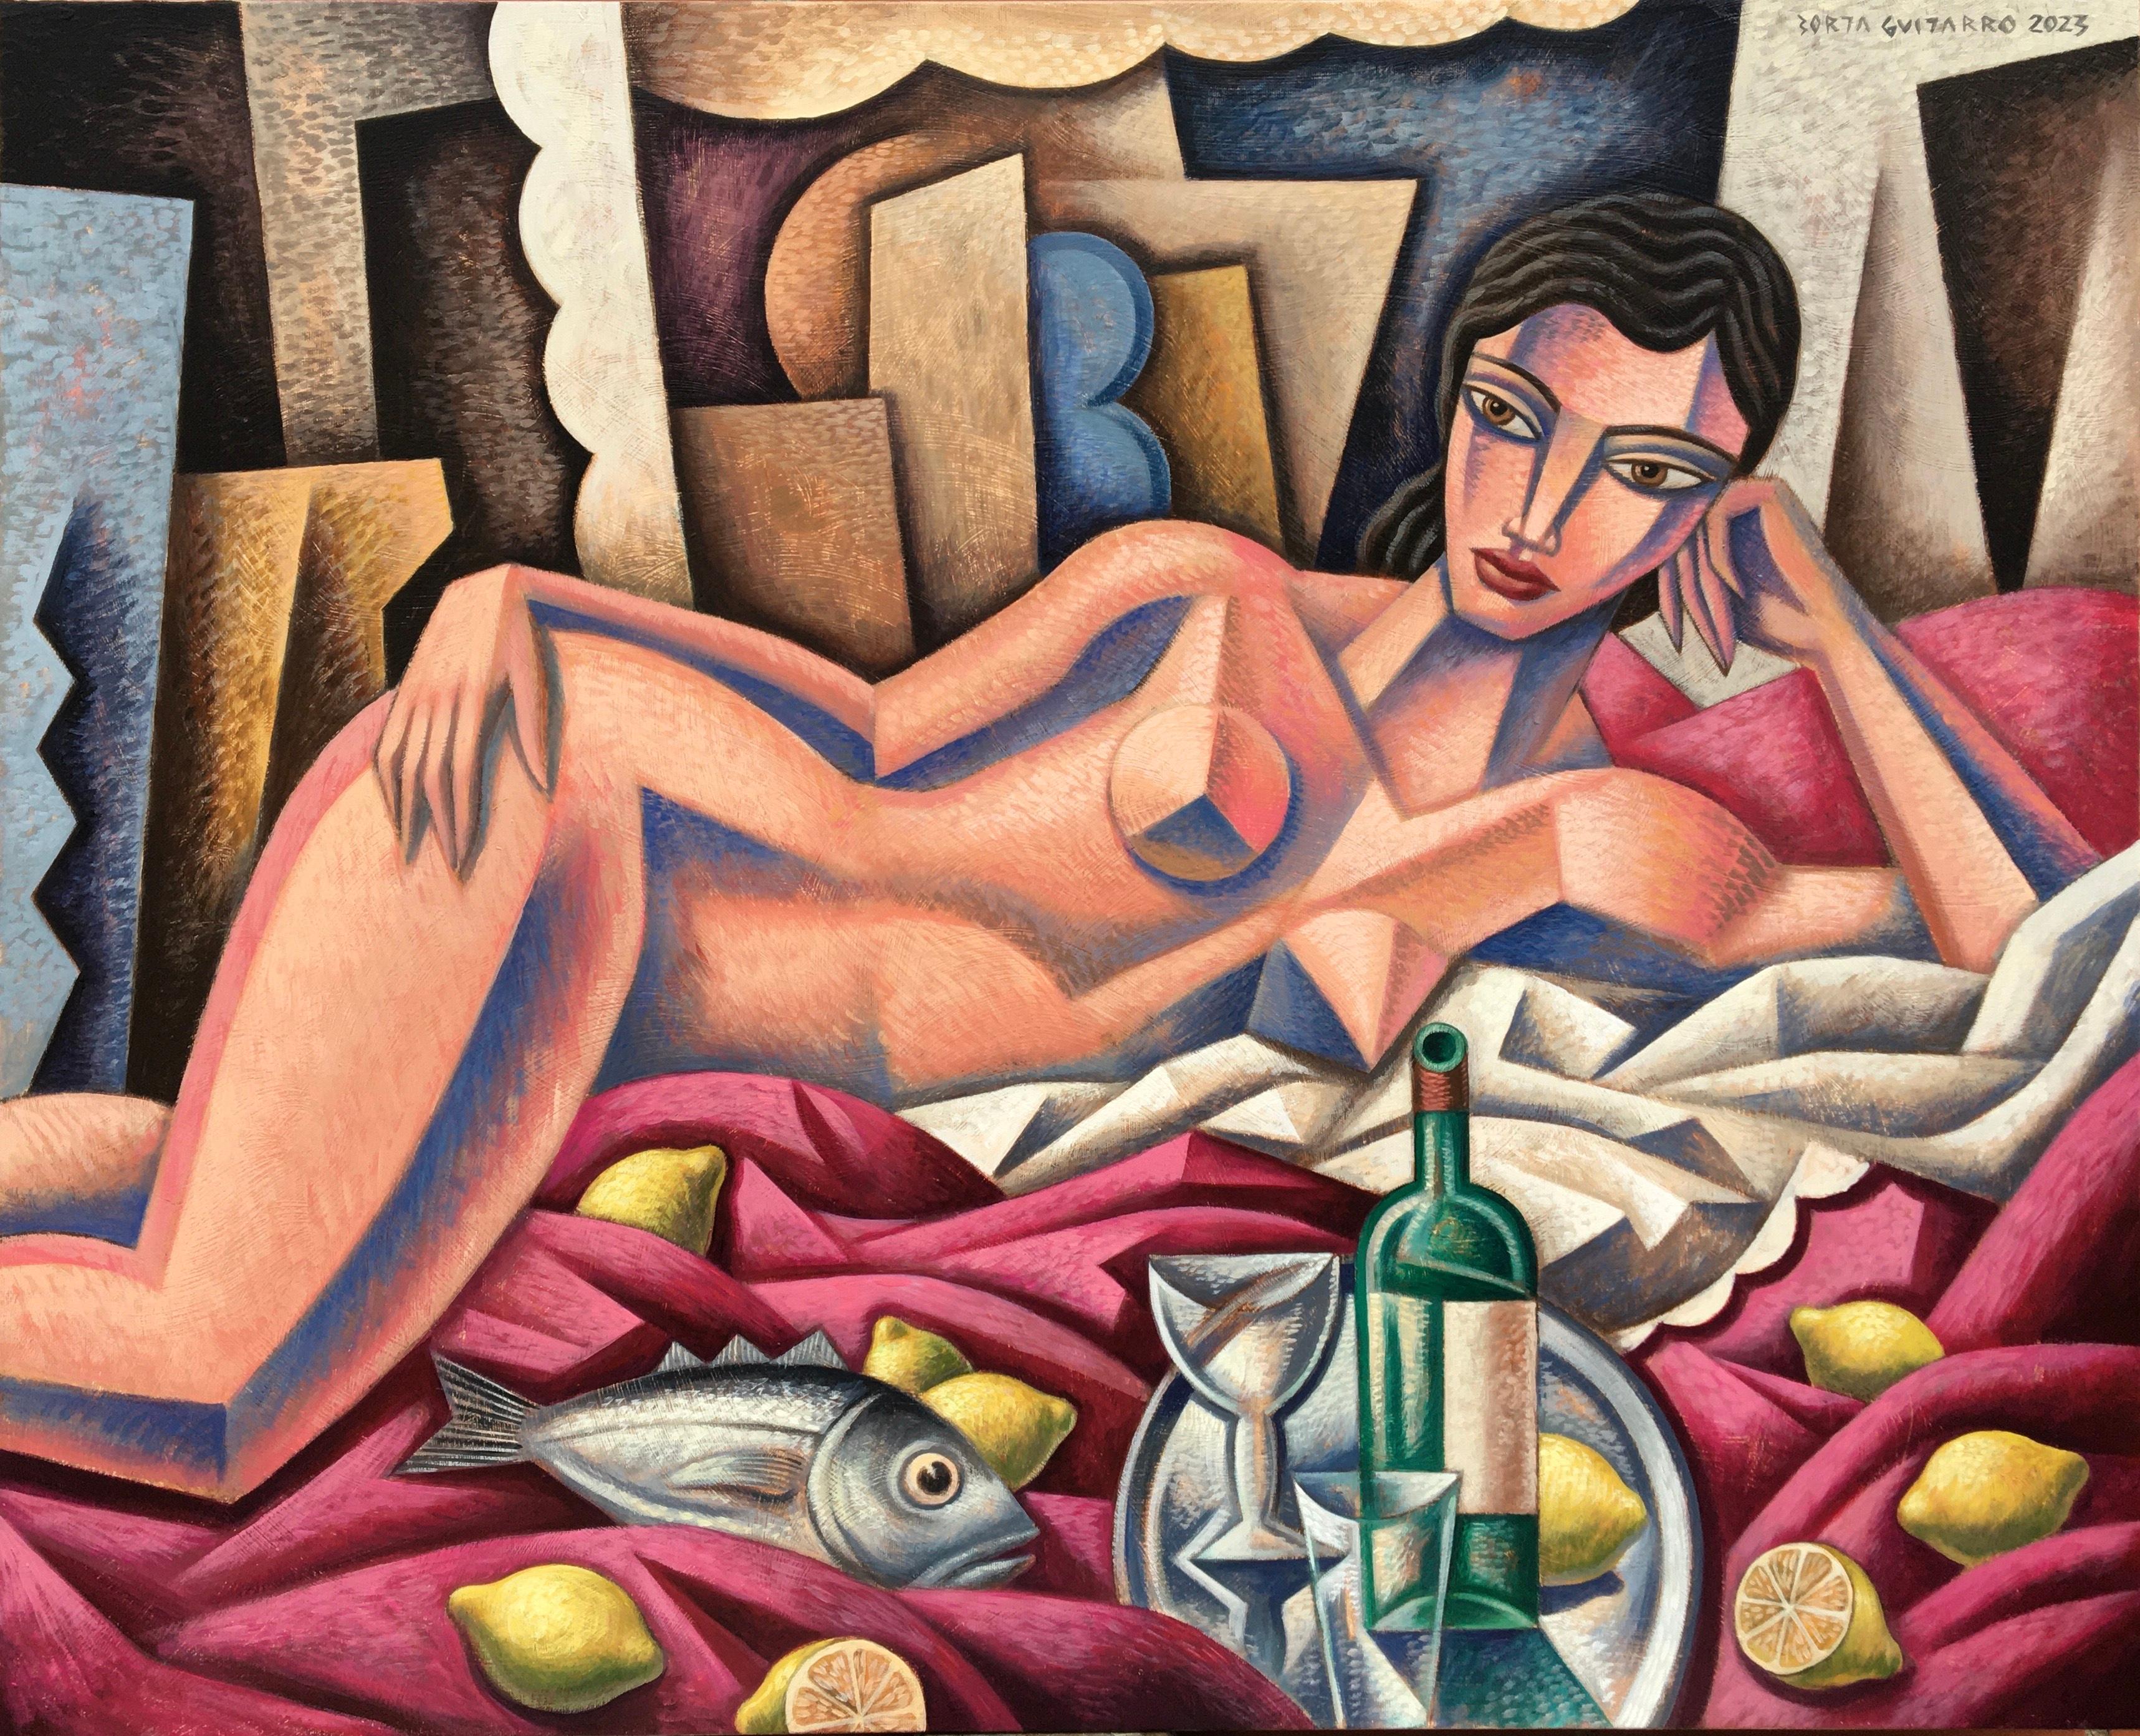 Mujer Y Limones - cubism art abstract figurative spanish portrature female form